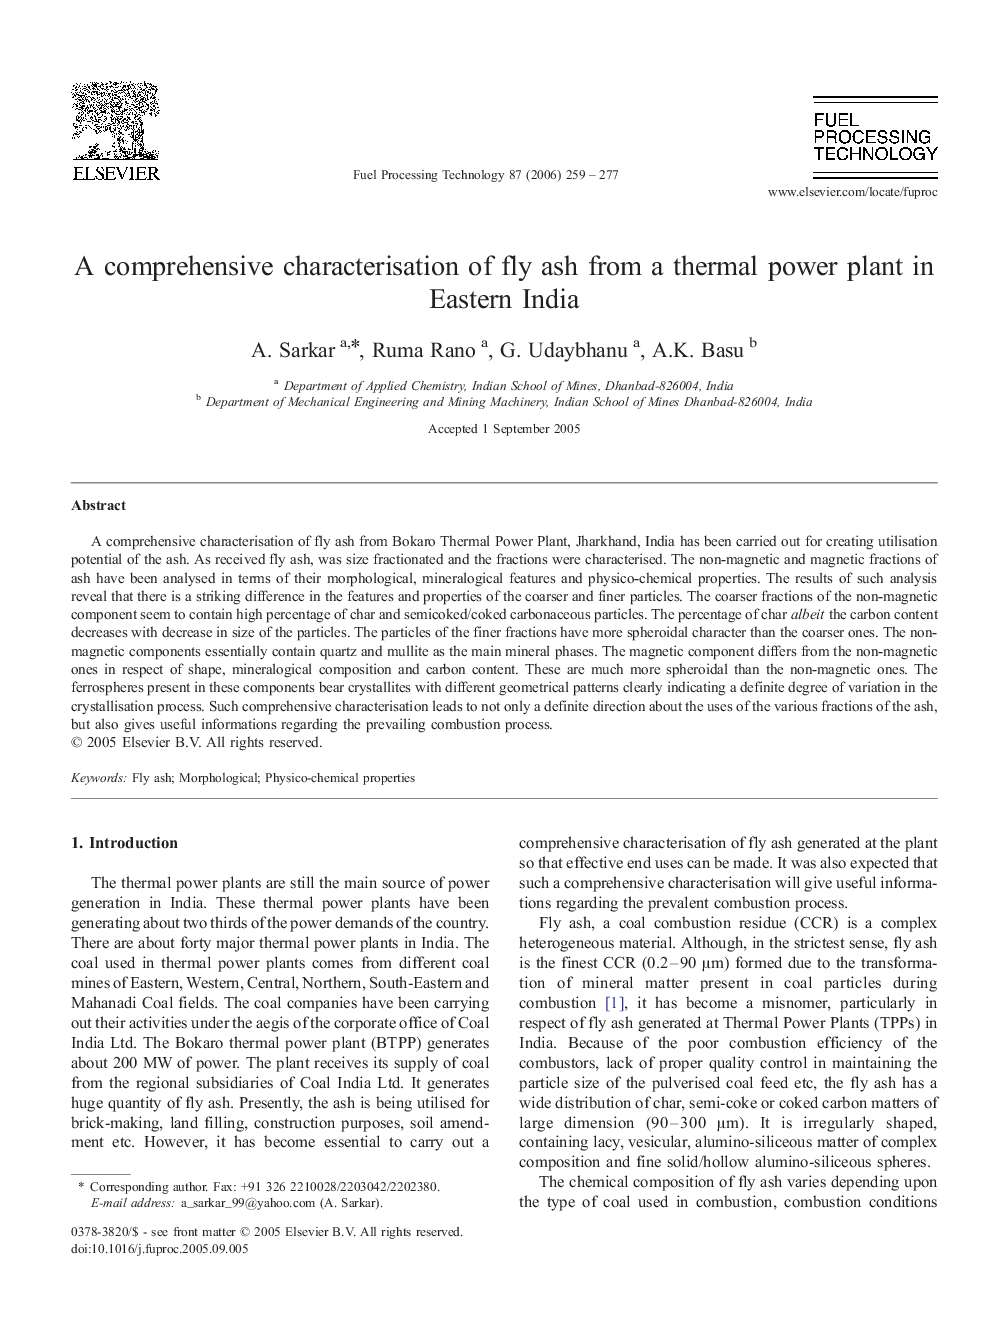 A comprehensive characterisation of fly ash from a thermal power plant in Eastern India